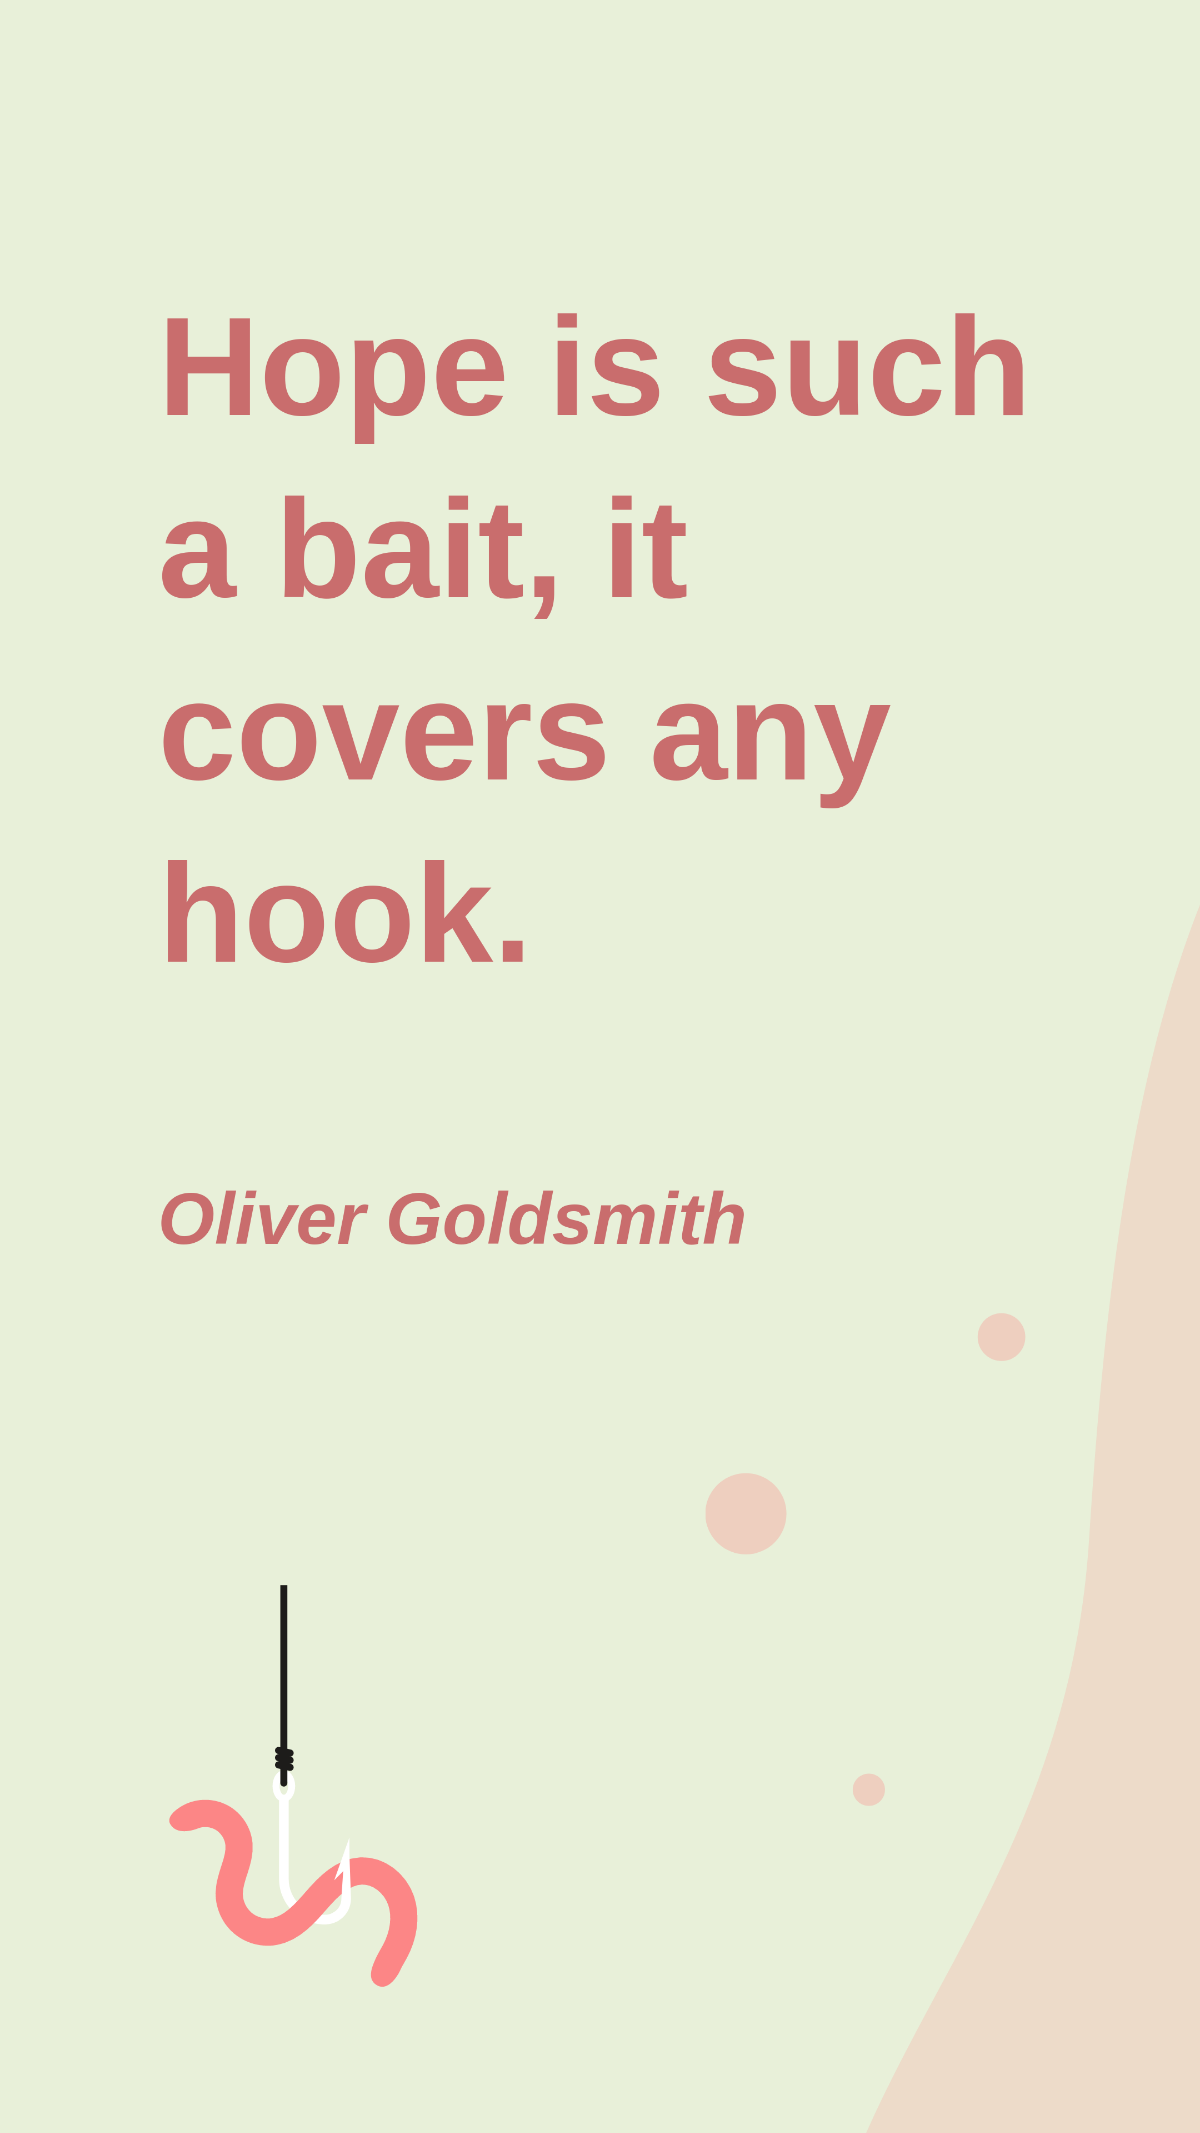 Oliver Goldsmith - Hope is such a bait, it covers any hook.